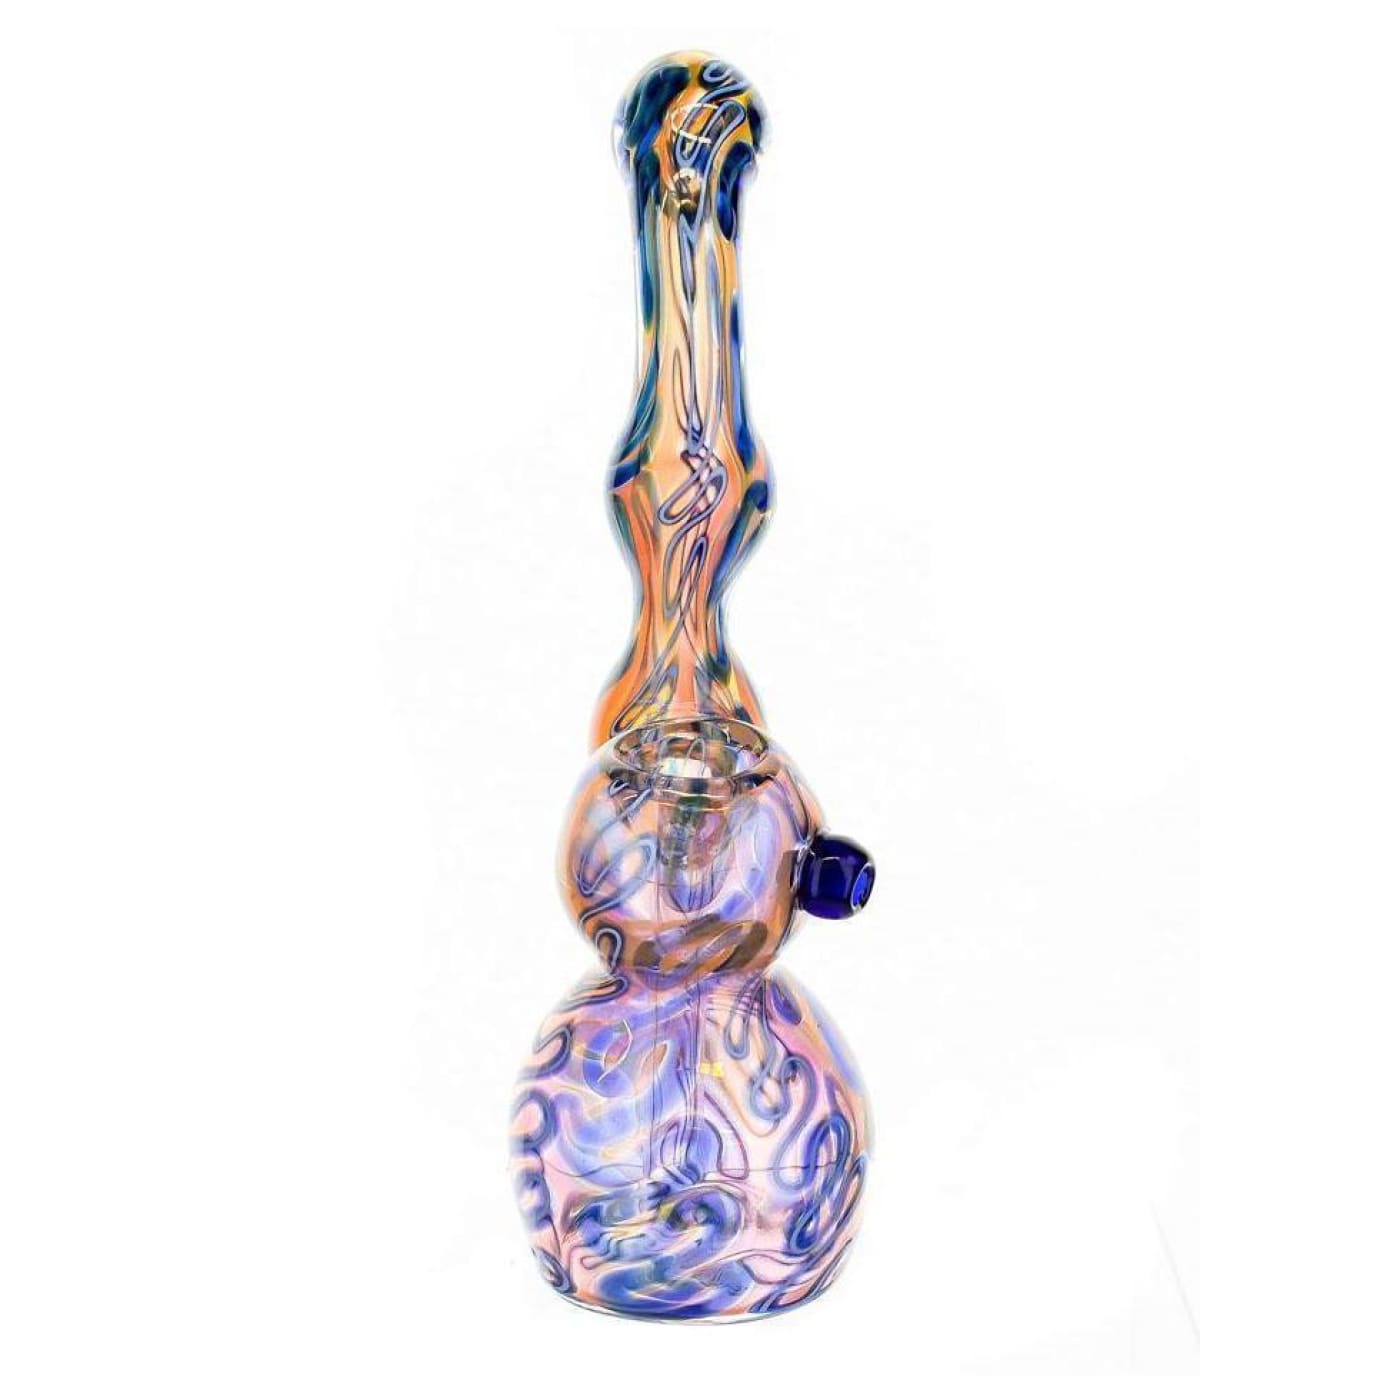 Pink & Blue Lattacino with Square Stem Bubbler